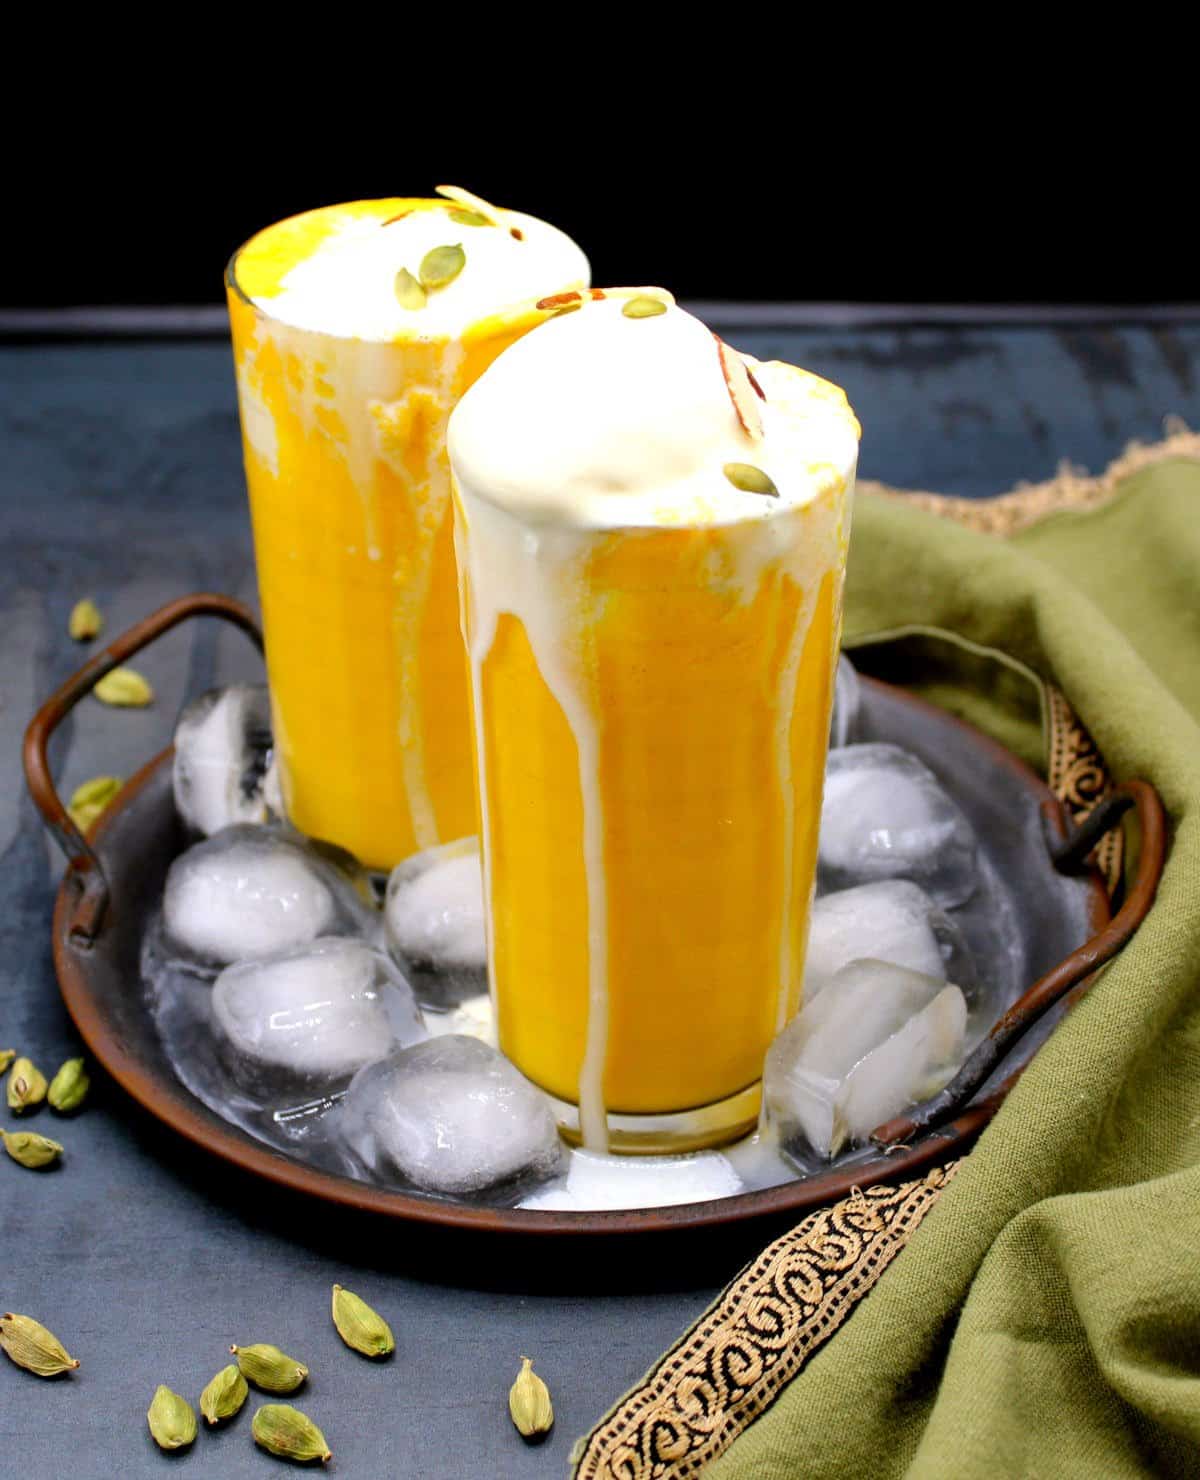 Two glasses of vegan mango smoothie topped with vegan ice cream and an almond and pumpkin seed garnish. The glasses are standing in a tray with cubes of ice and cardamom pods are strewn around.